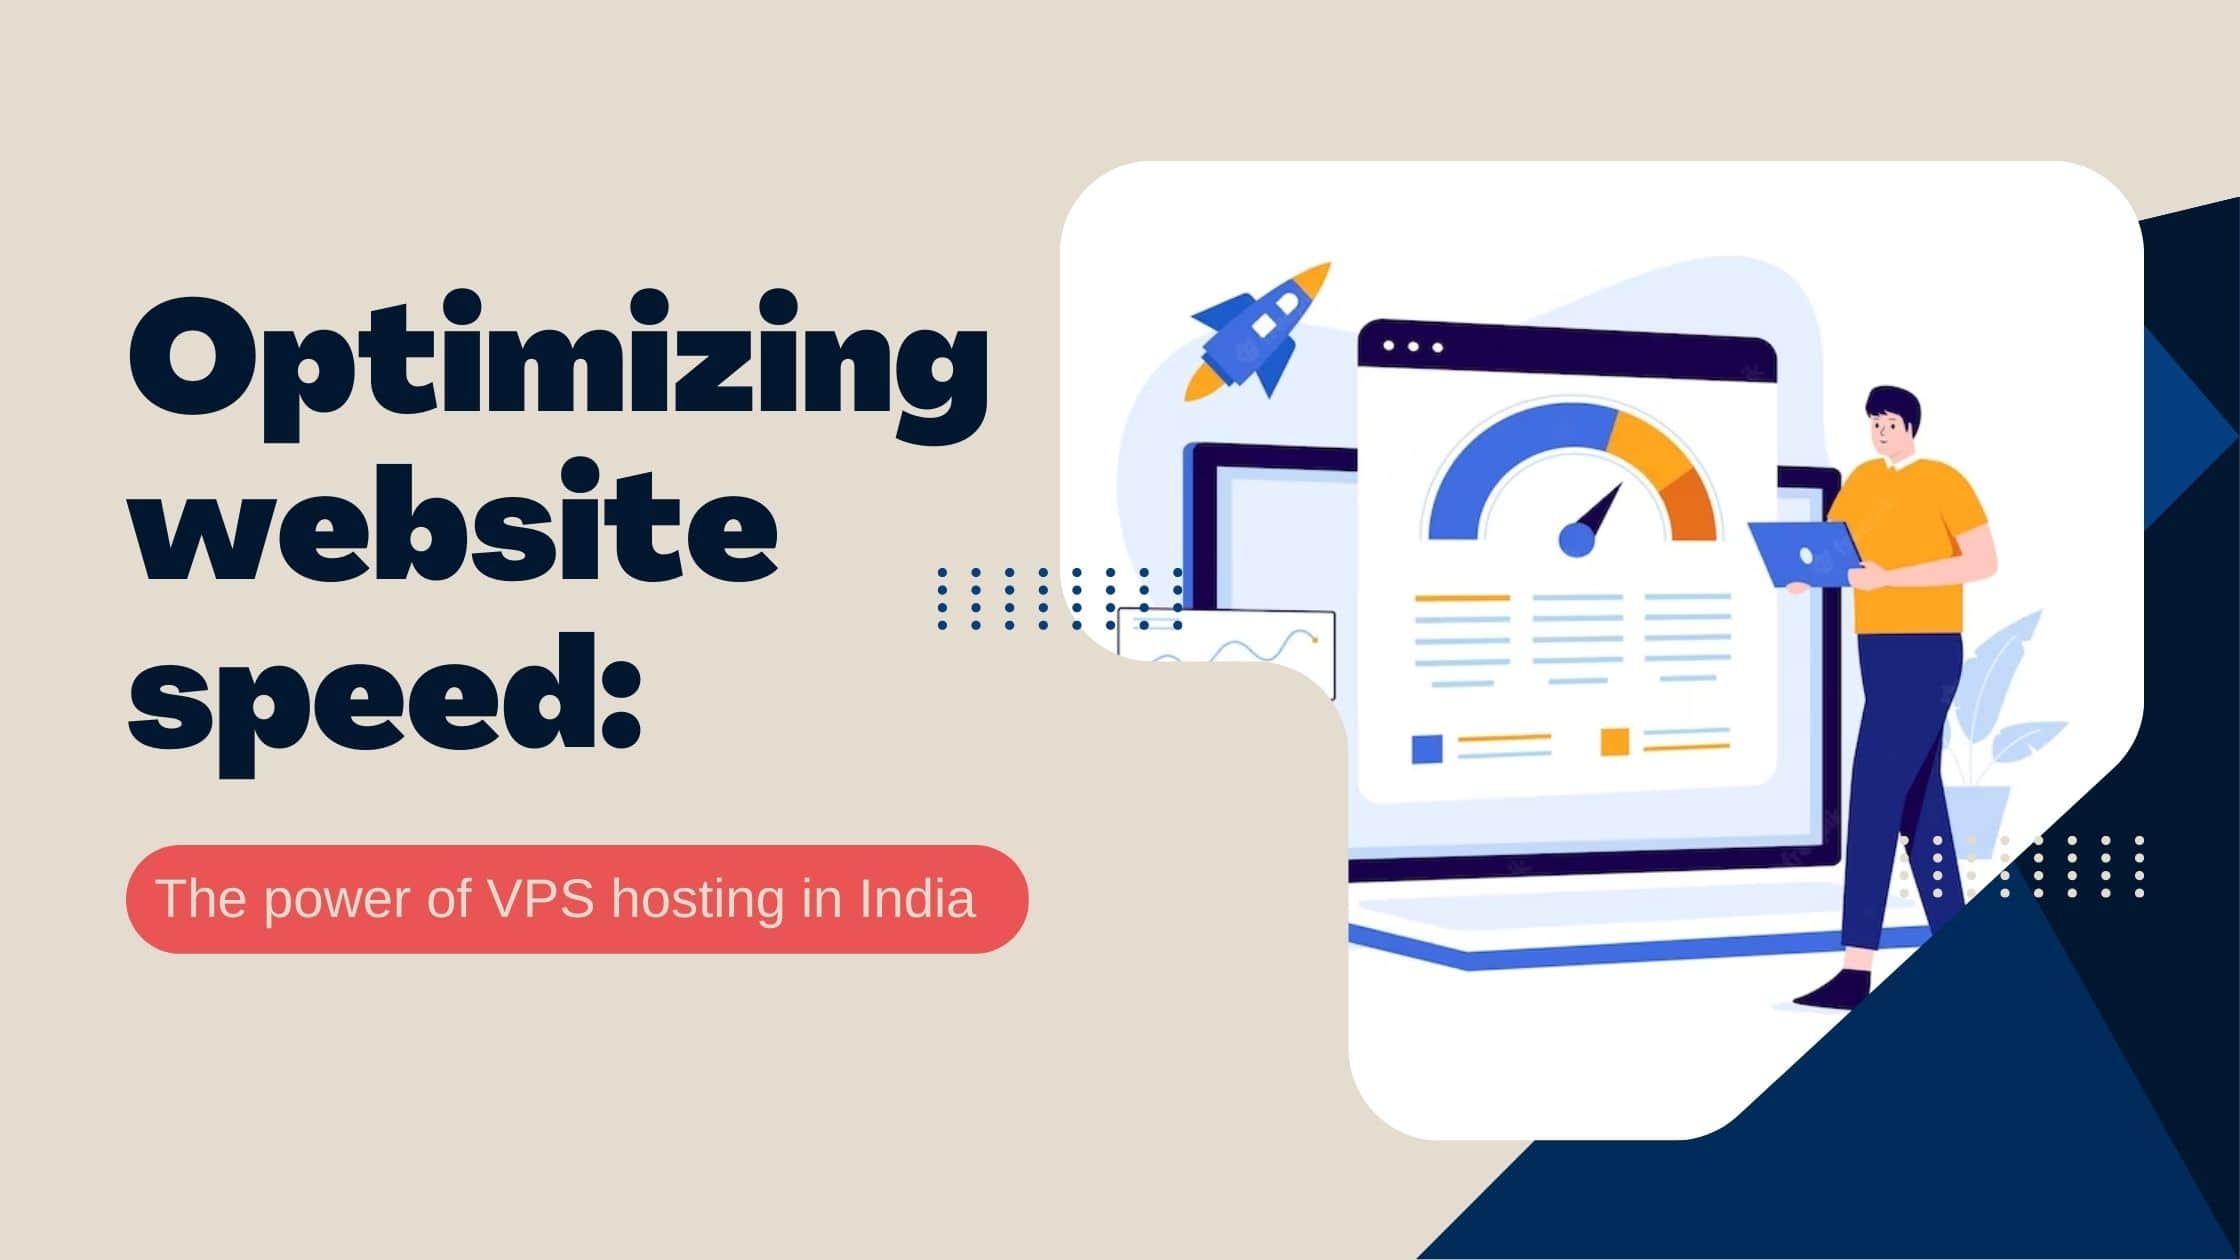 Optimizing website speed The power of VPS hosting in India